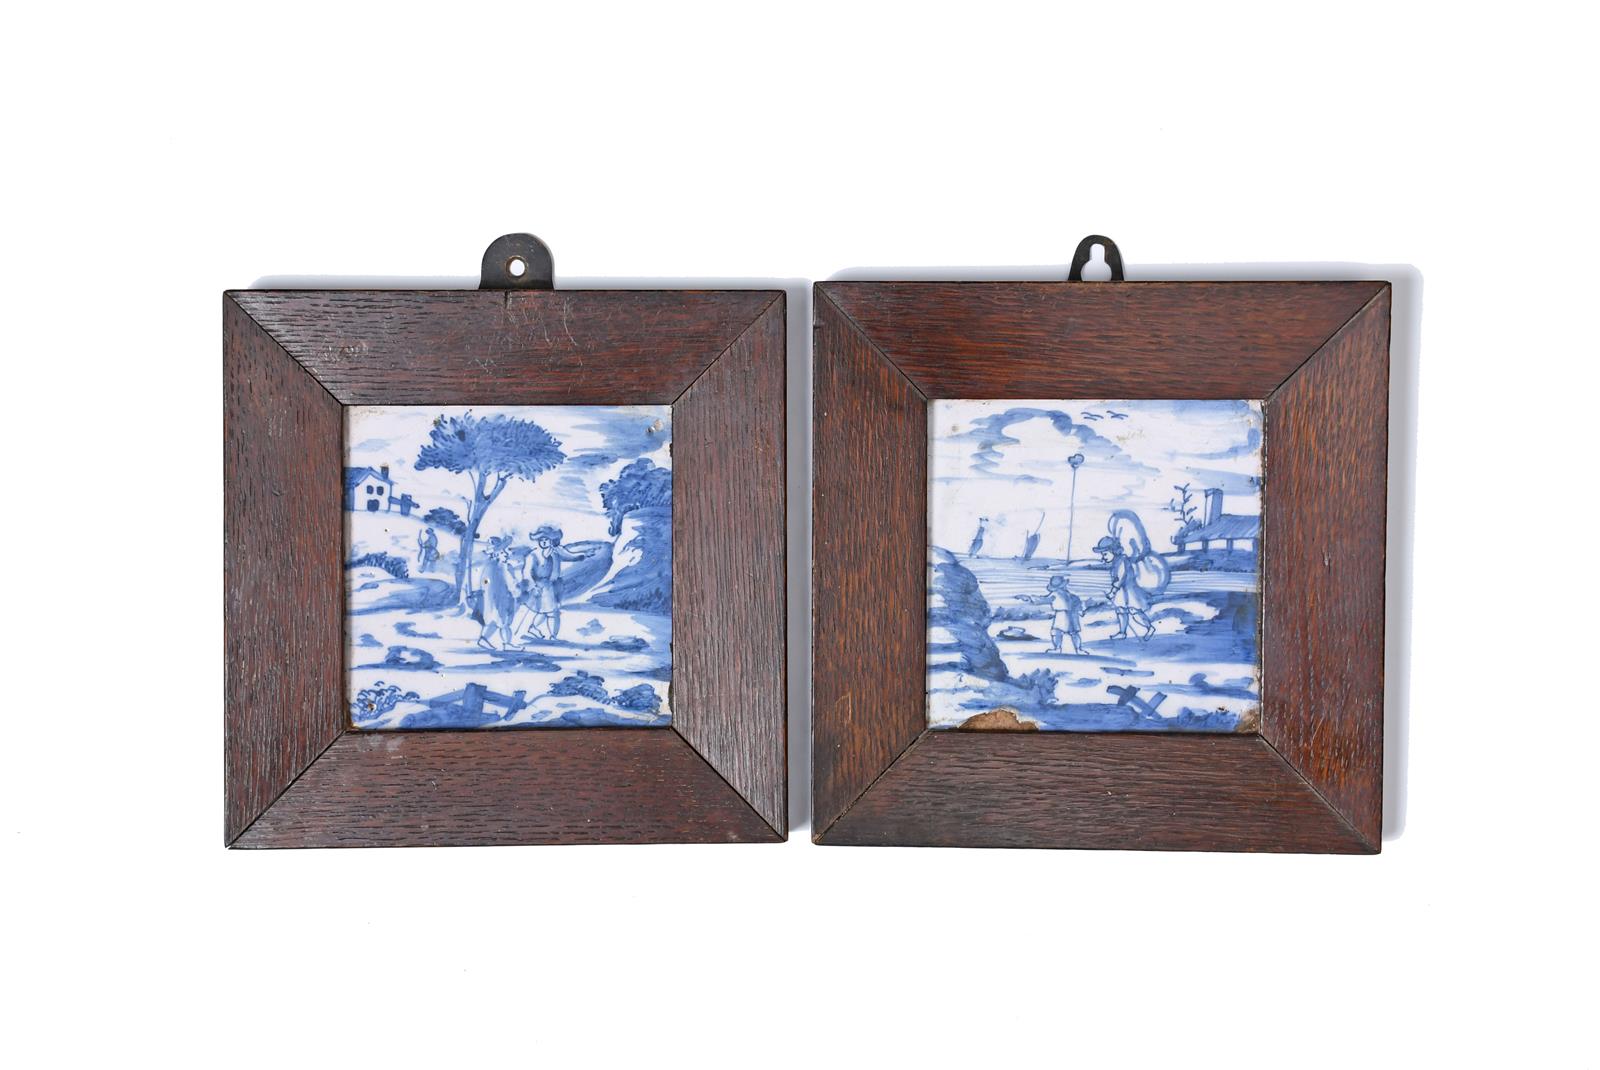 Two London delftware tiles, c.1720-40, painted in blue with travellers in a landscape, at the